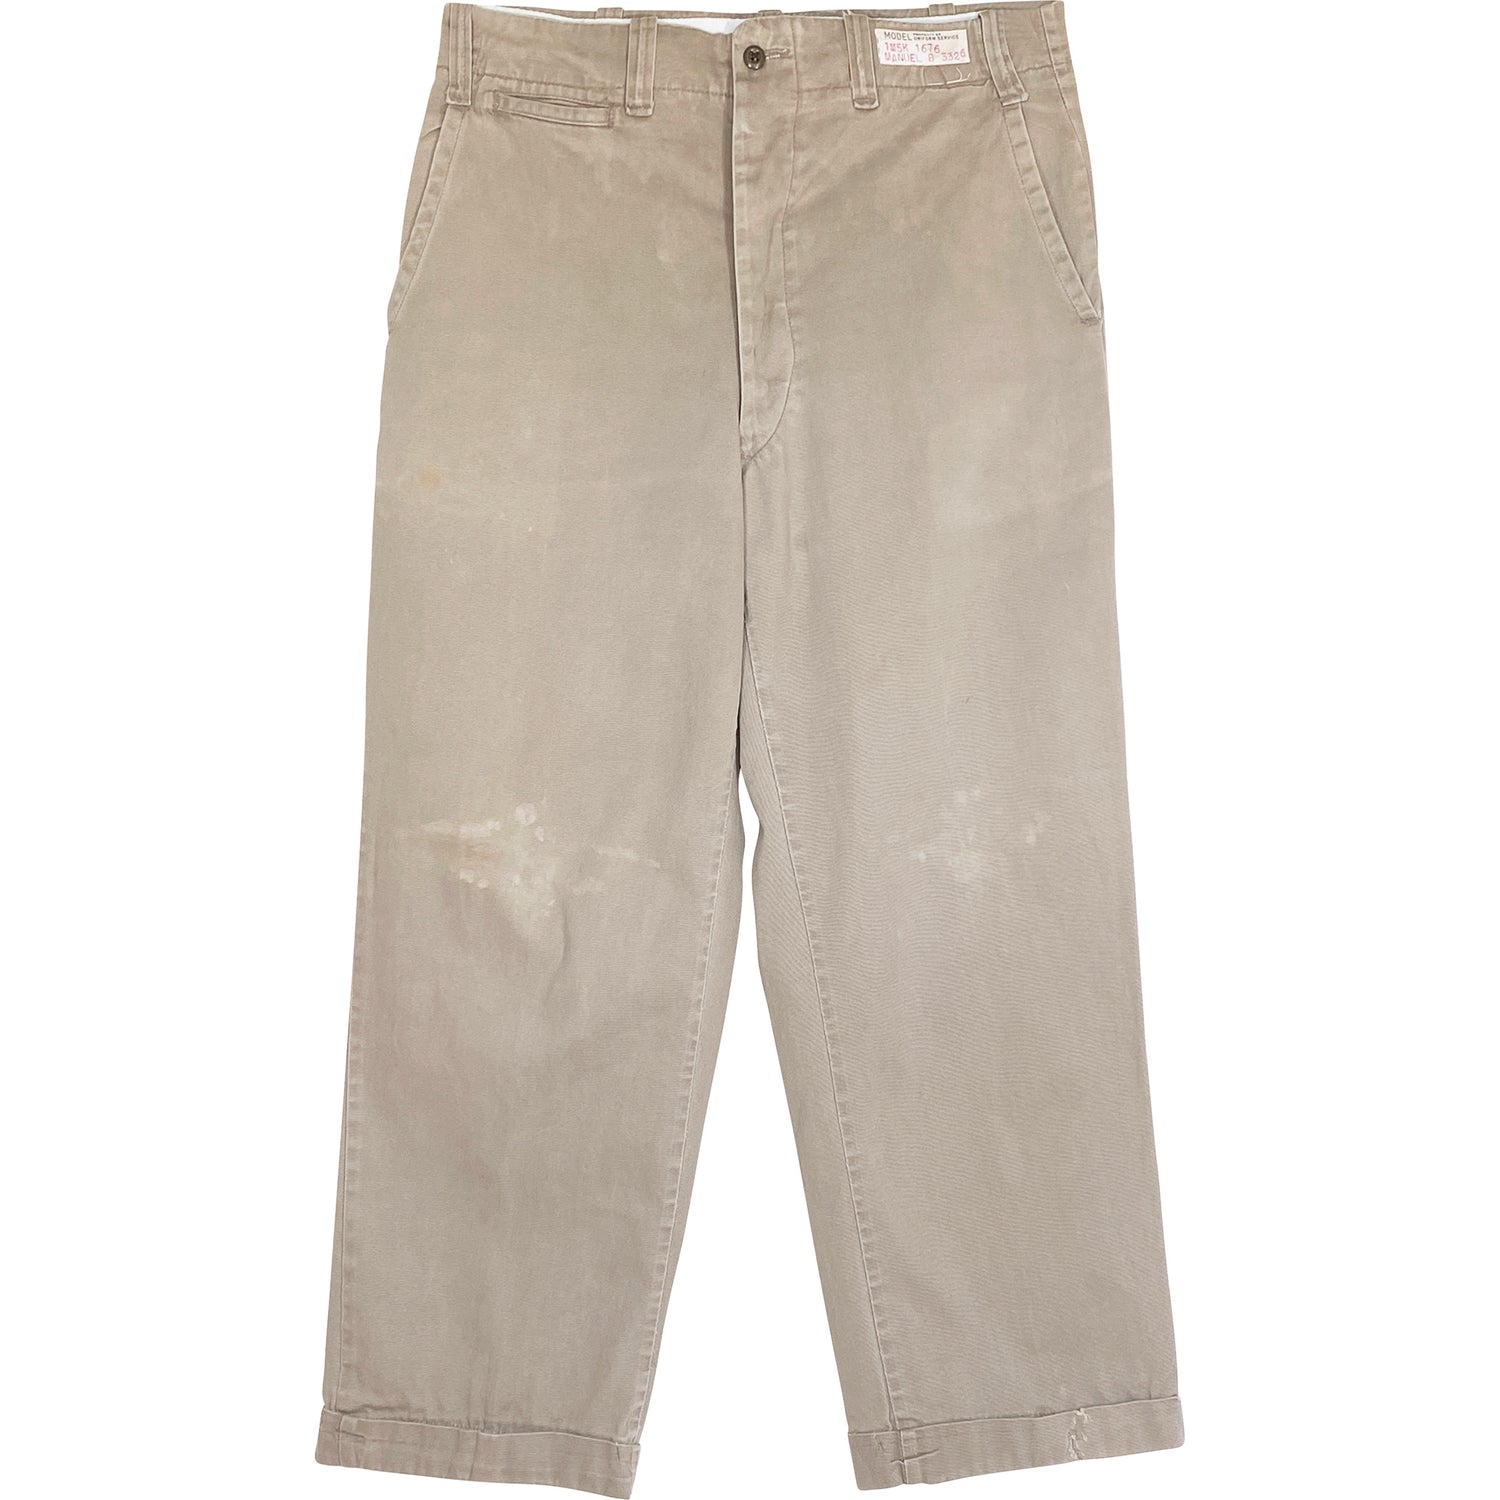 VINTAGE BEAT UP WORK CHINOS - Size 30